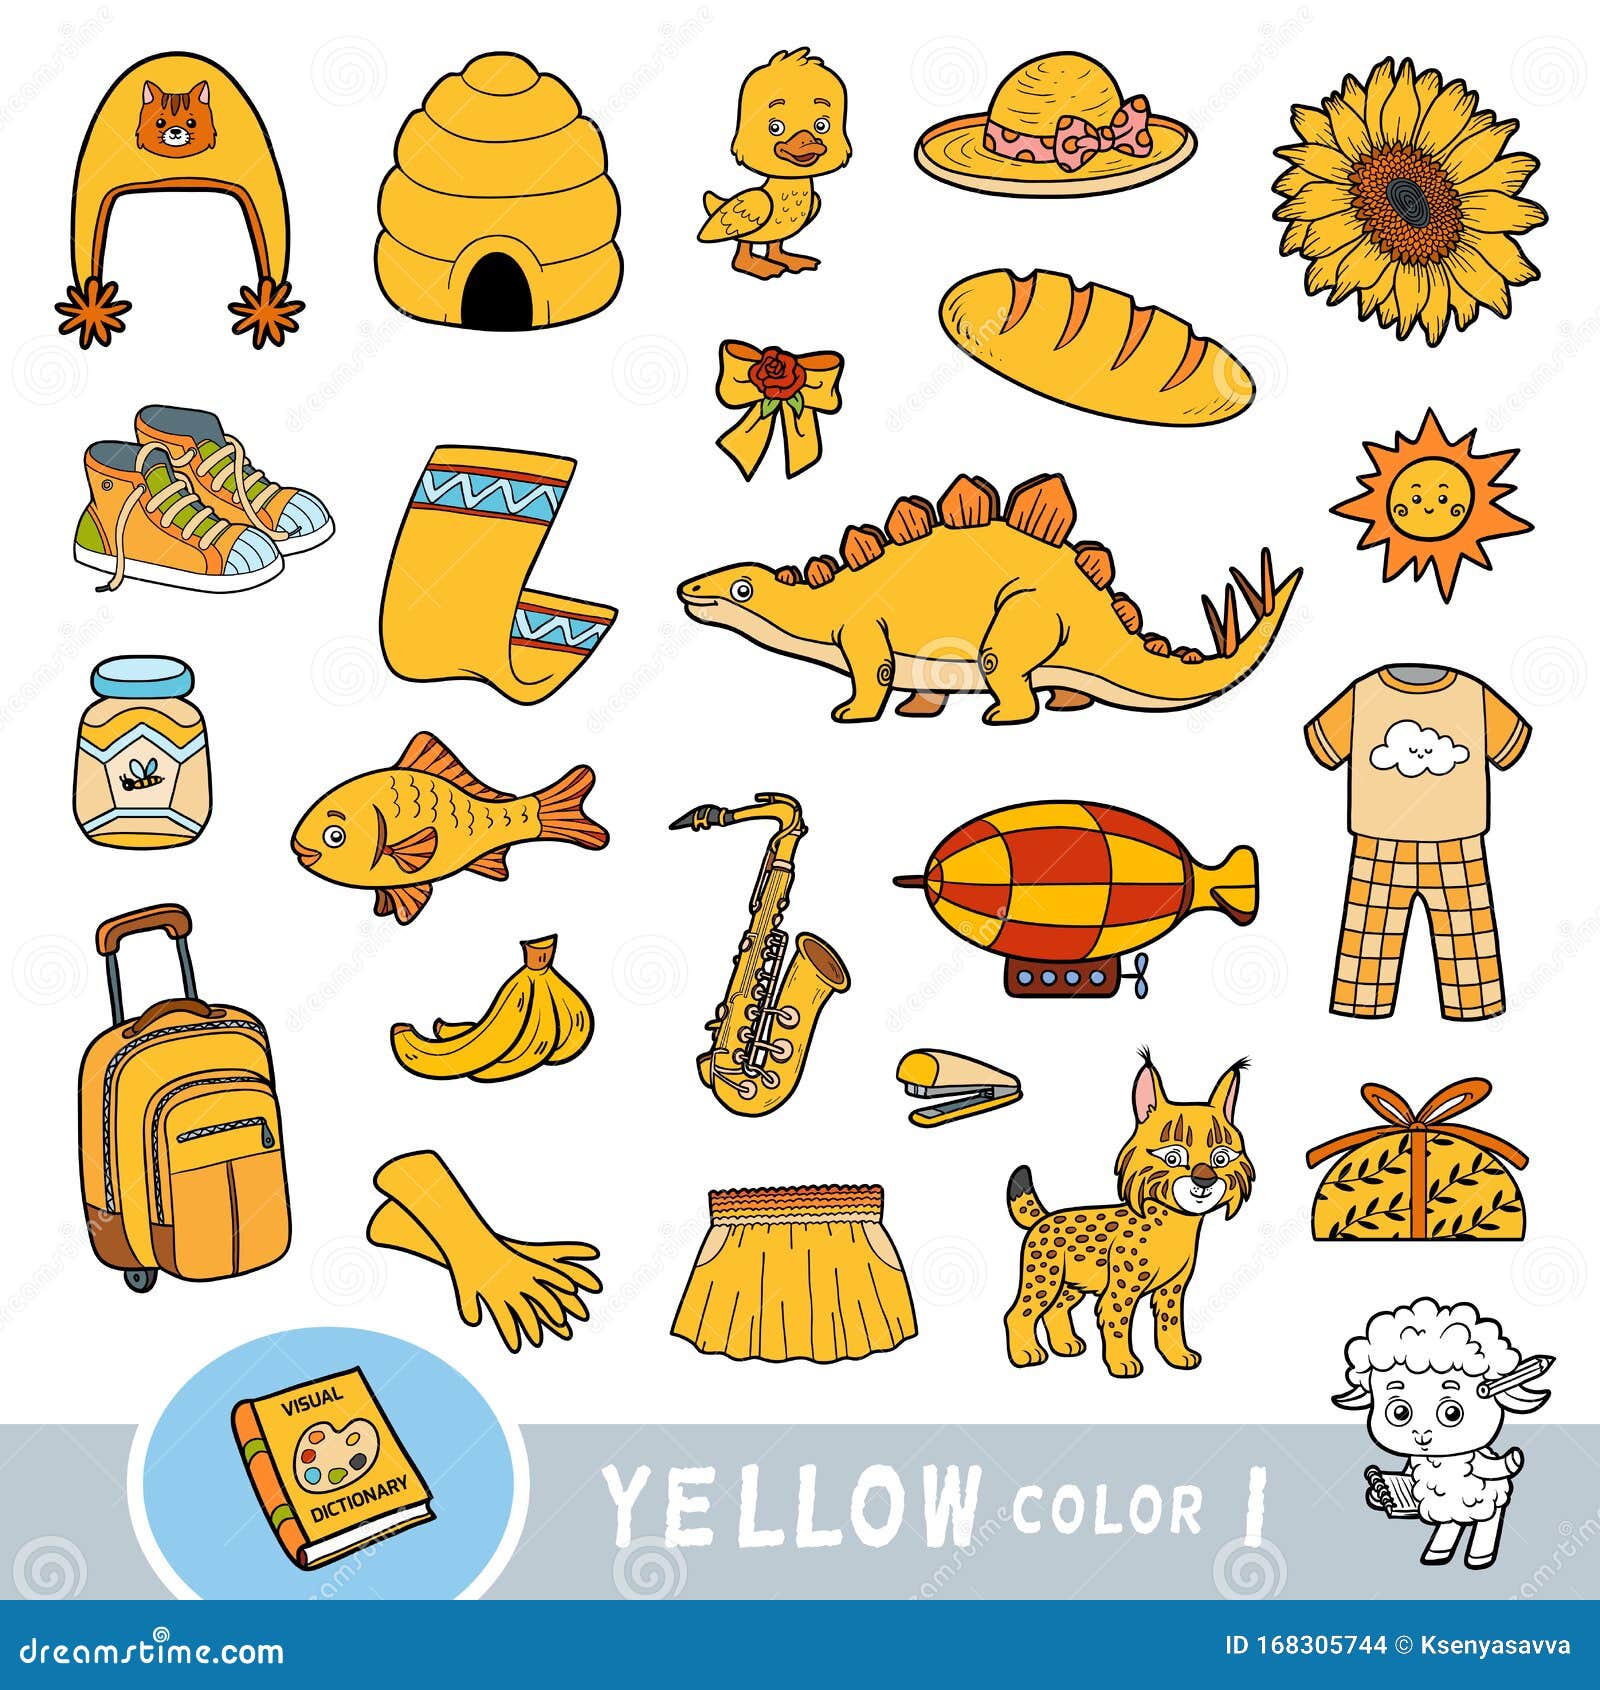 Download Colorful Set Of Yellow Color Objects. Visual Dictionary For Children About The Basic Colors ...